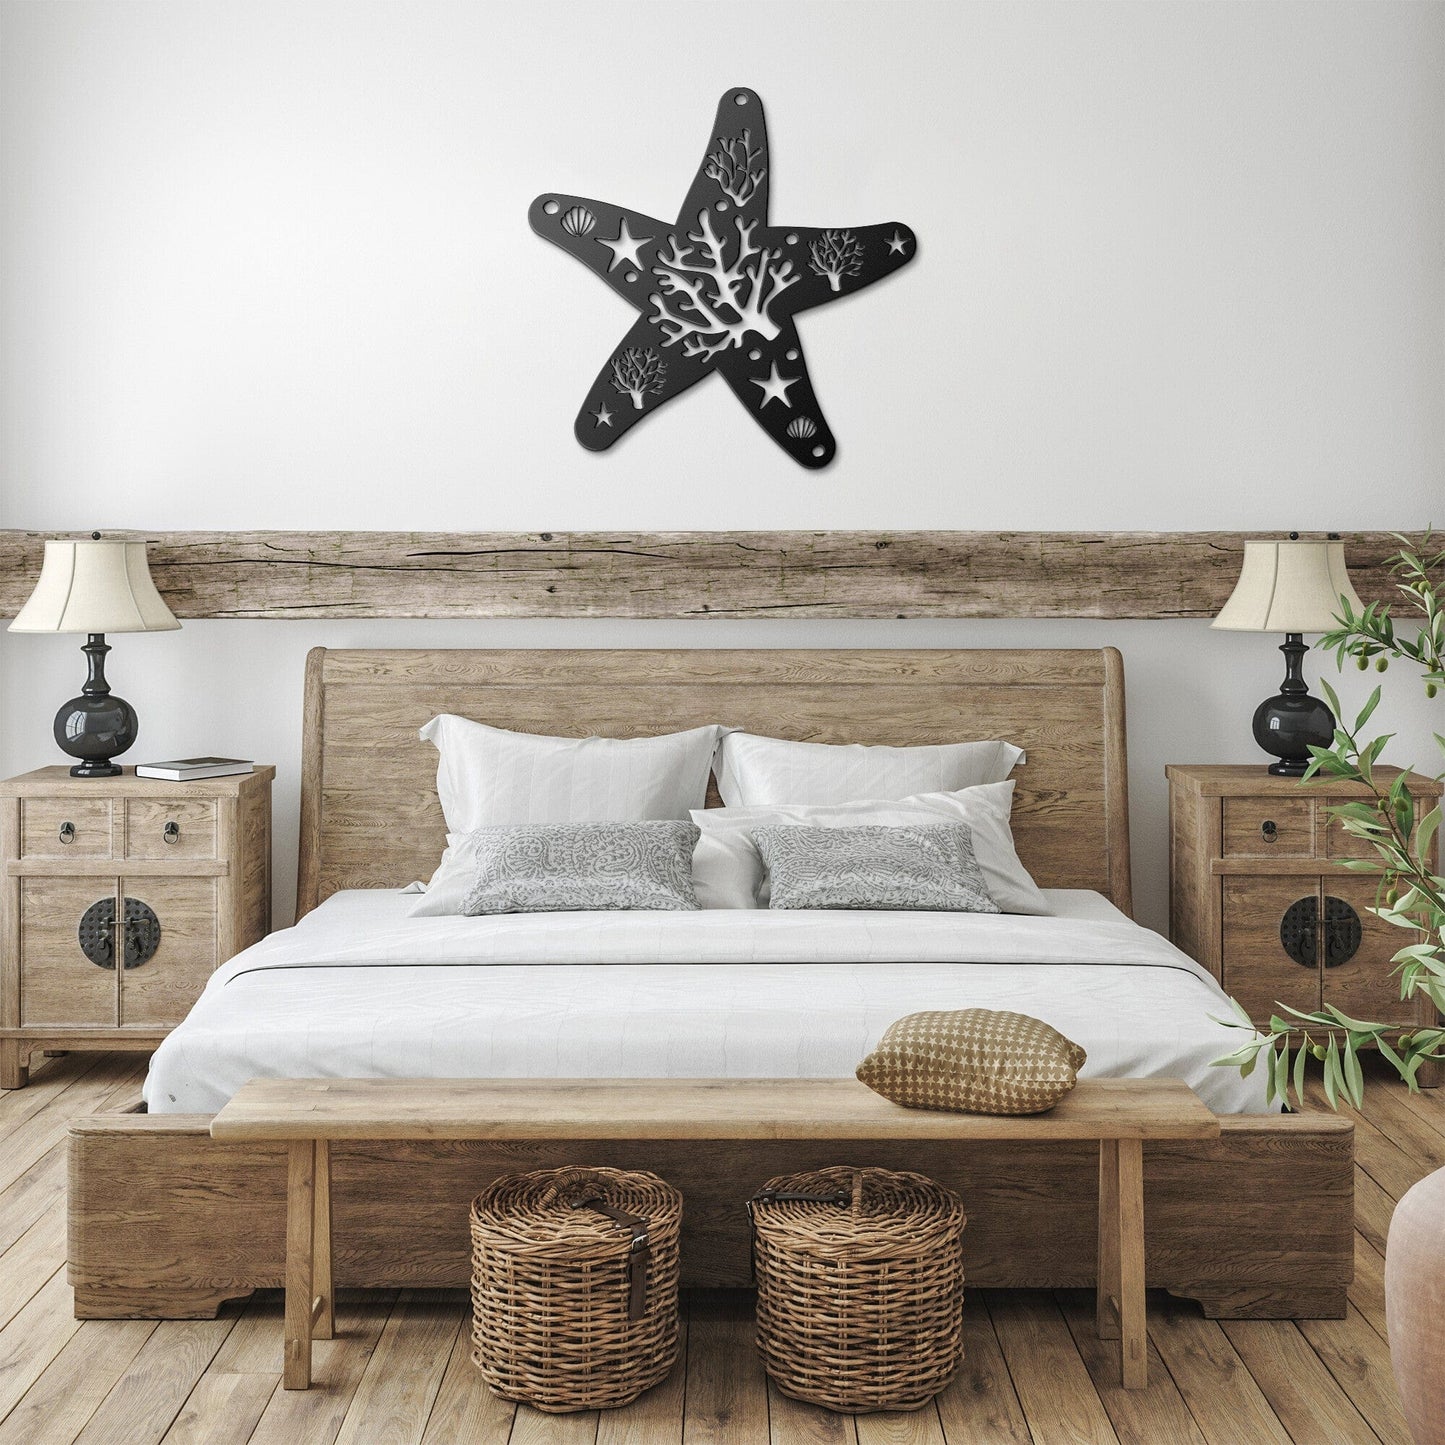 Starfish with Coral Reef Beach Decorative Metal Wall Art